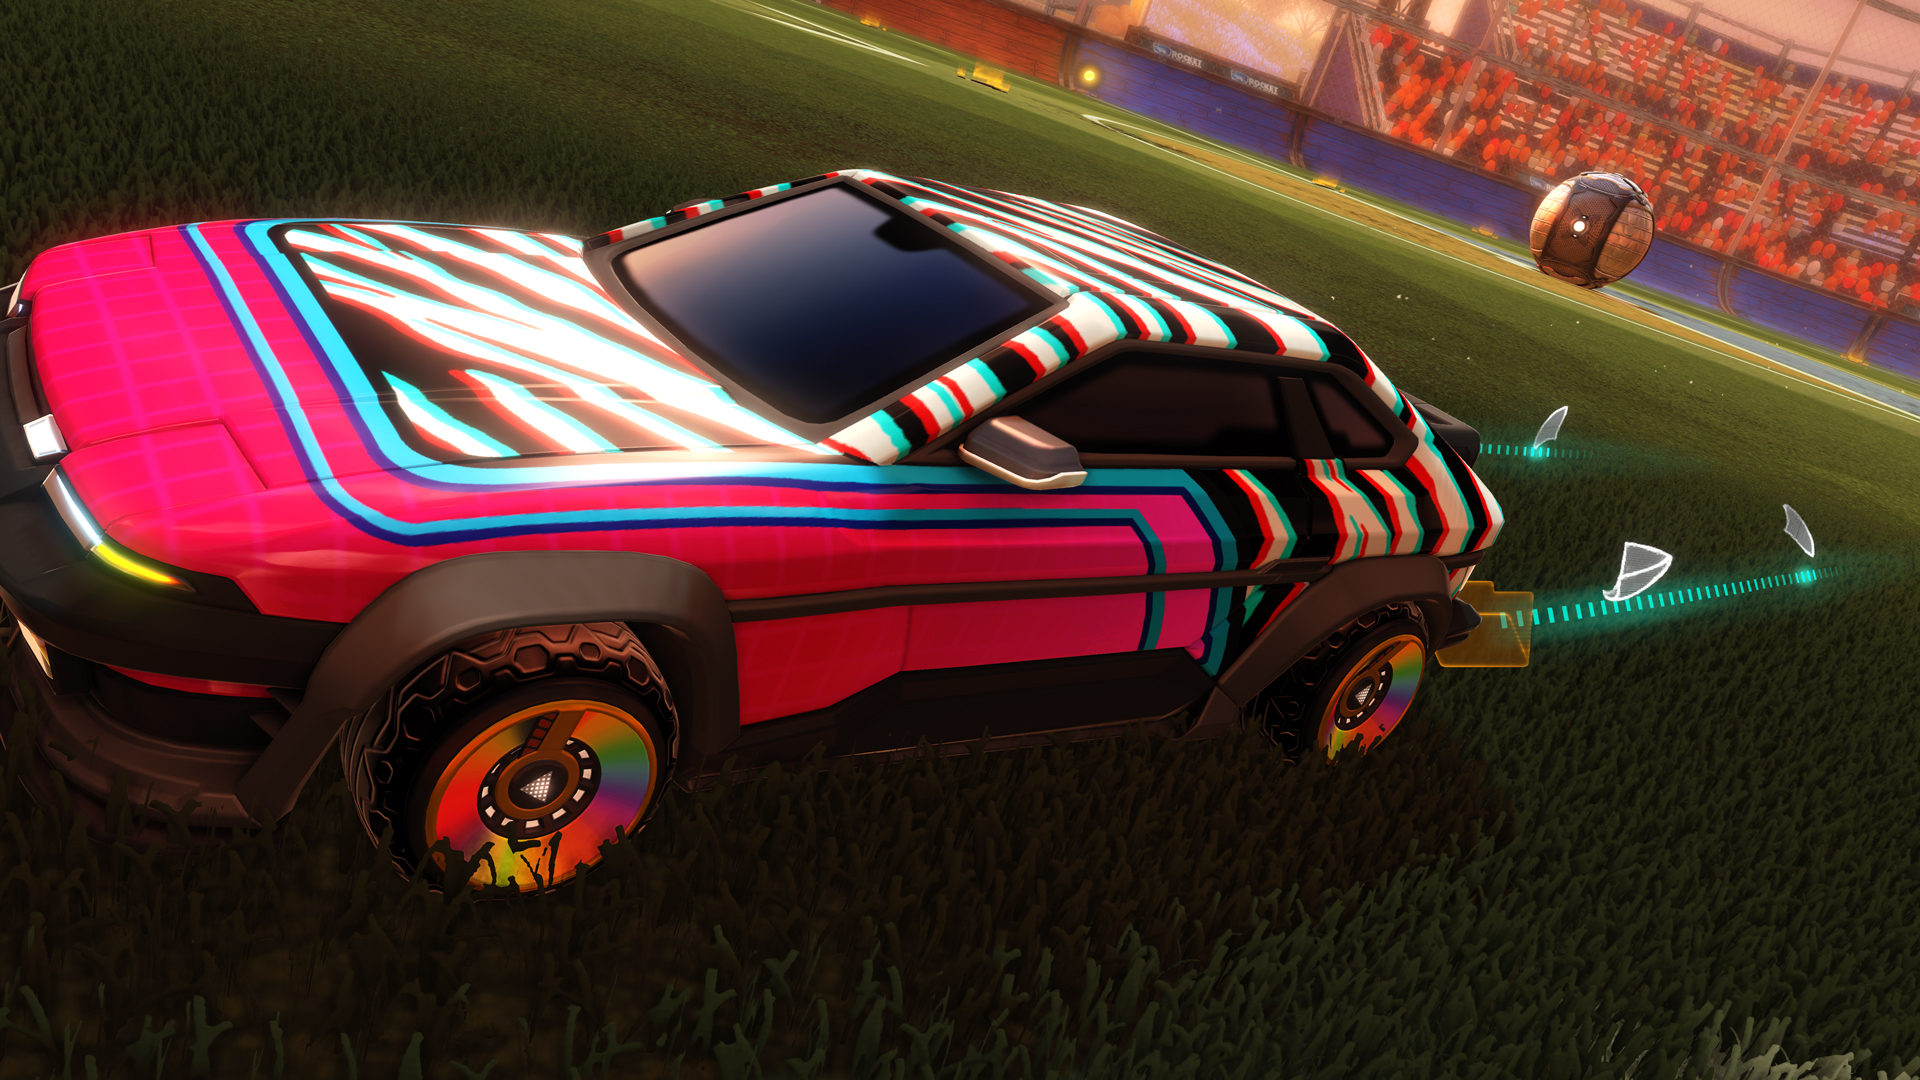 The Lightning McQueen Car Body and Other Cosmetics Hit the Soccar Pitch in  Rocket League : r/RocketLeague